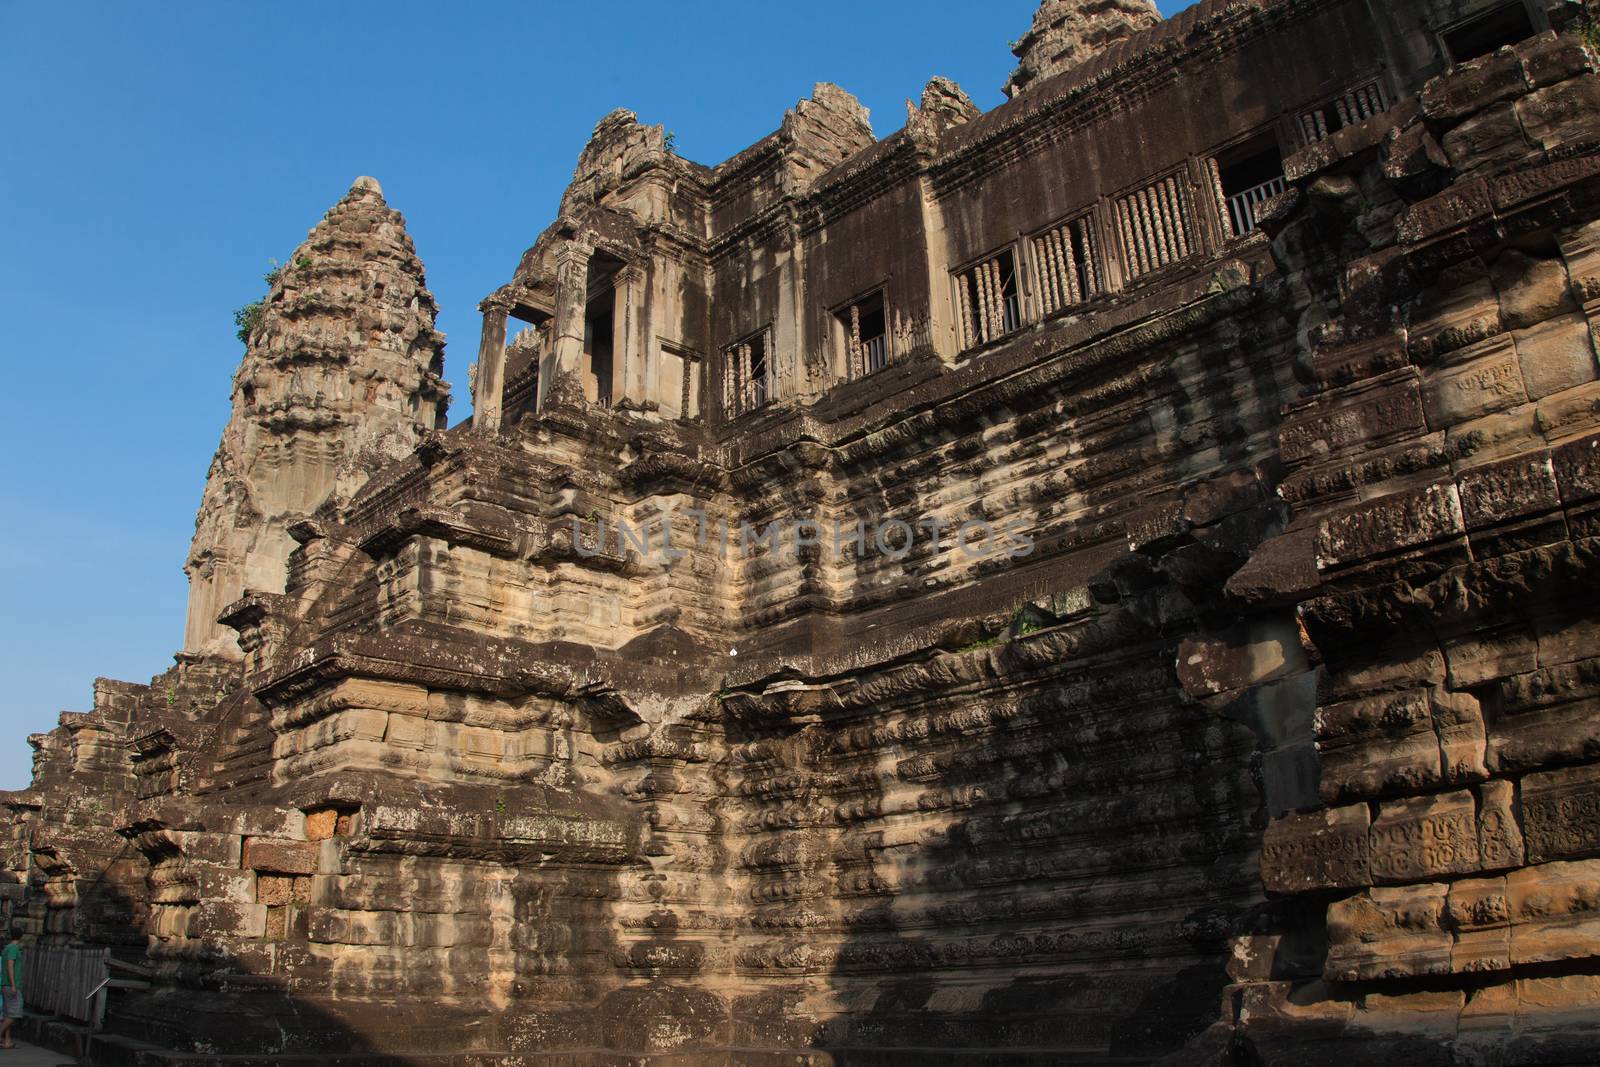 The temple complex of Angkor Watt, Cambodia, early morning sun looking up at towers and stairs. Warm coloured stones carved High quality photo